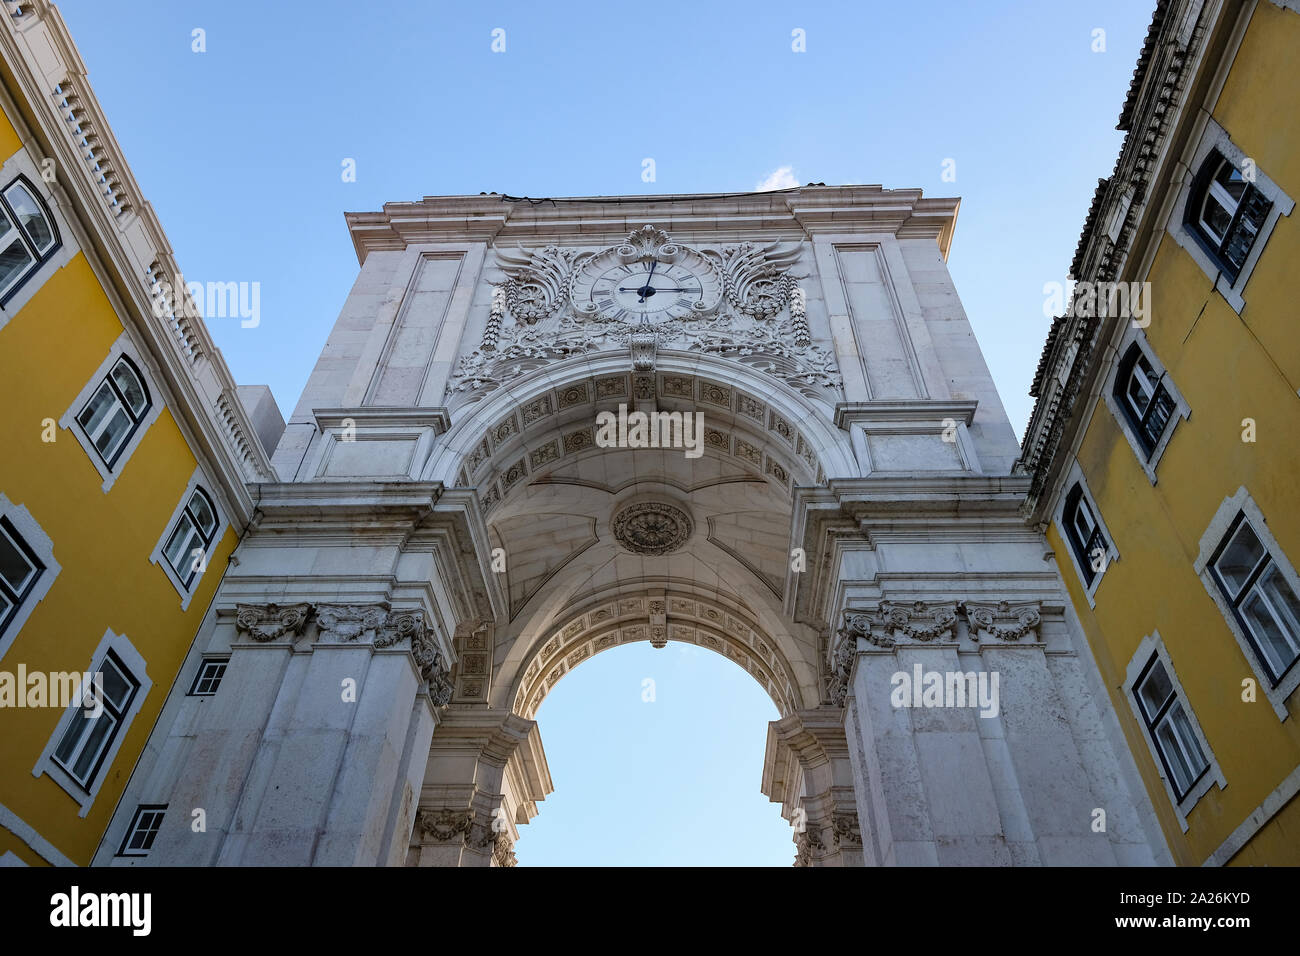 Monumental augusta arch over blue sky in lisbon, portugal urban historical architecture Stock Photo